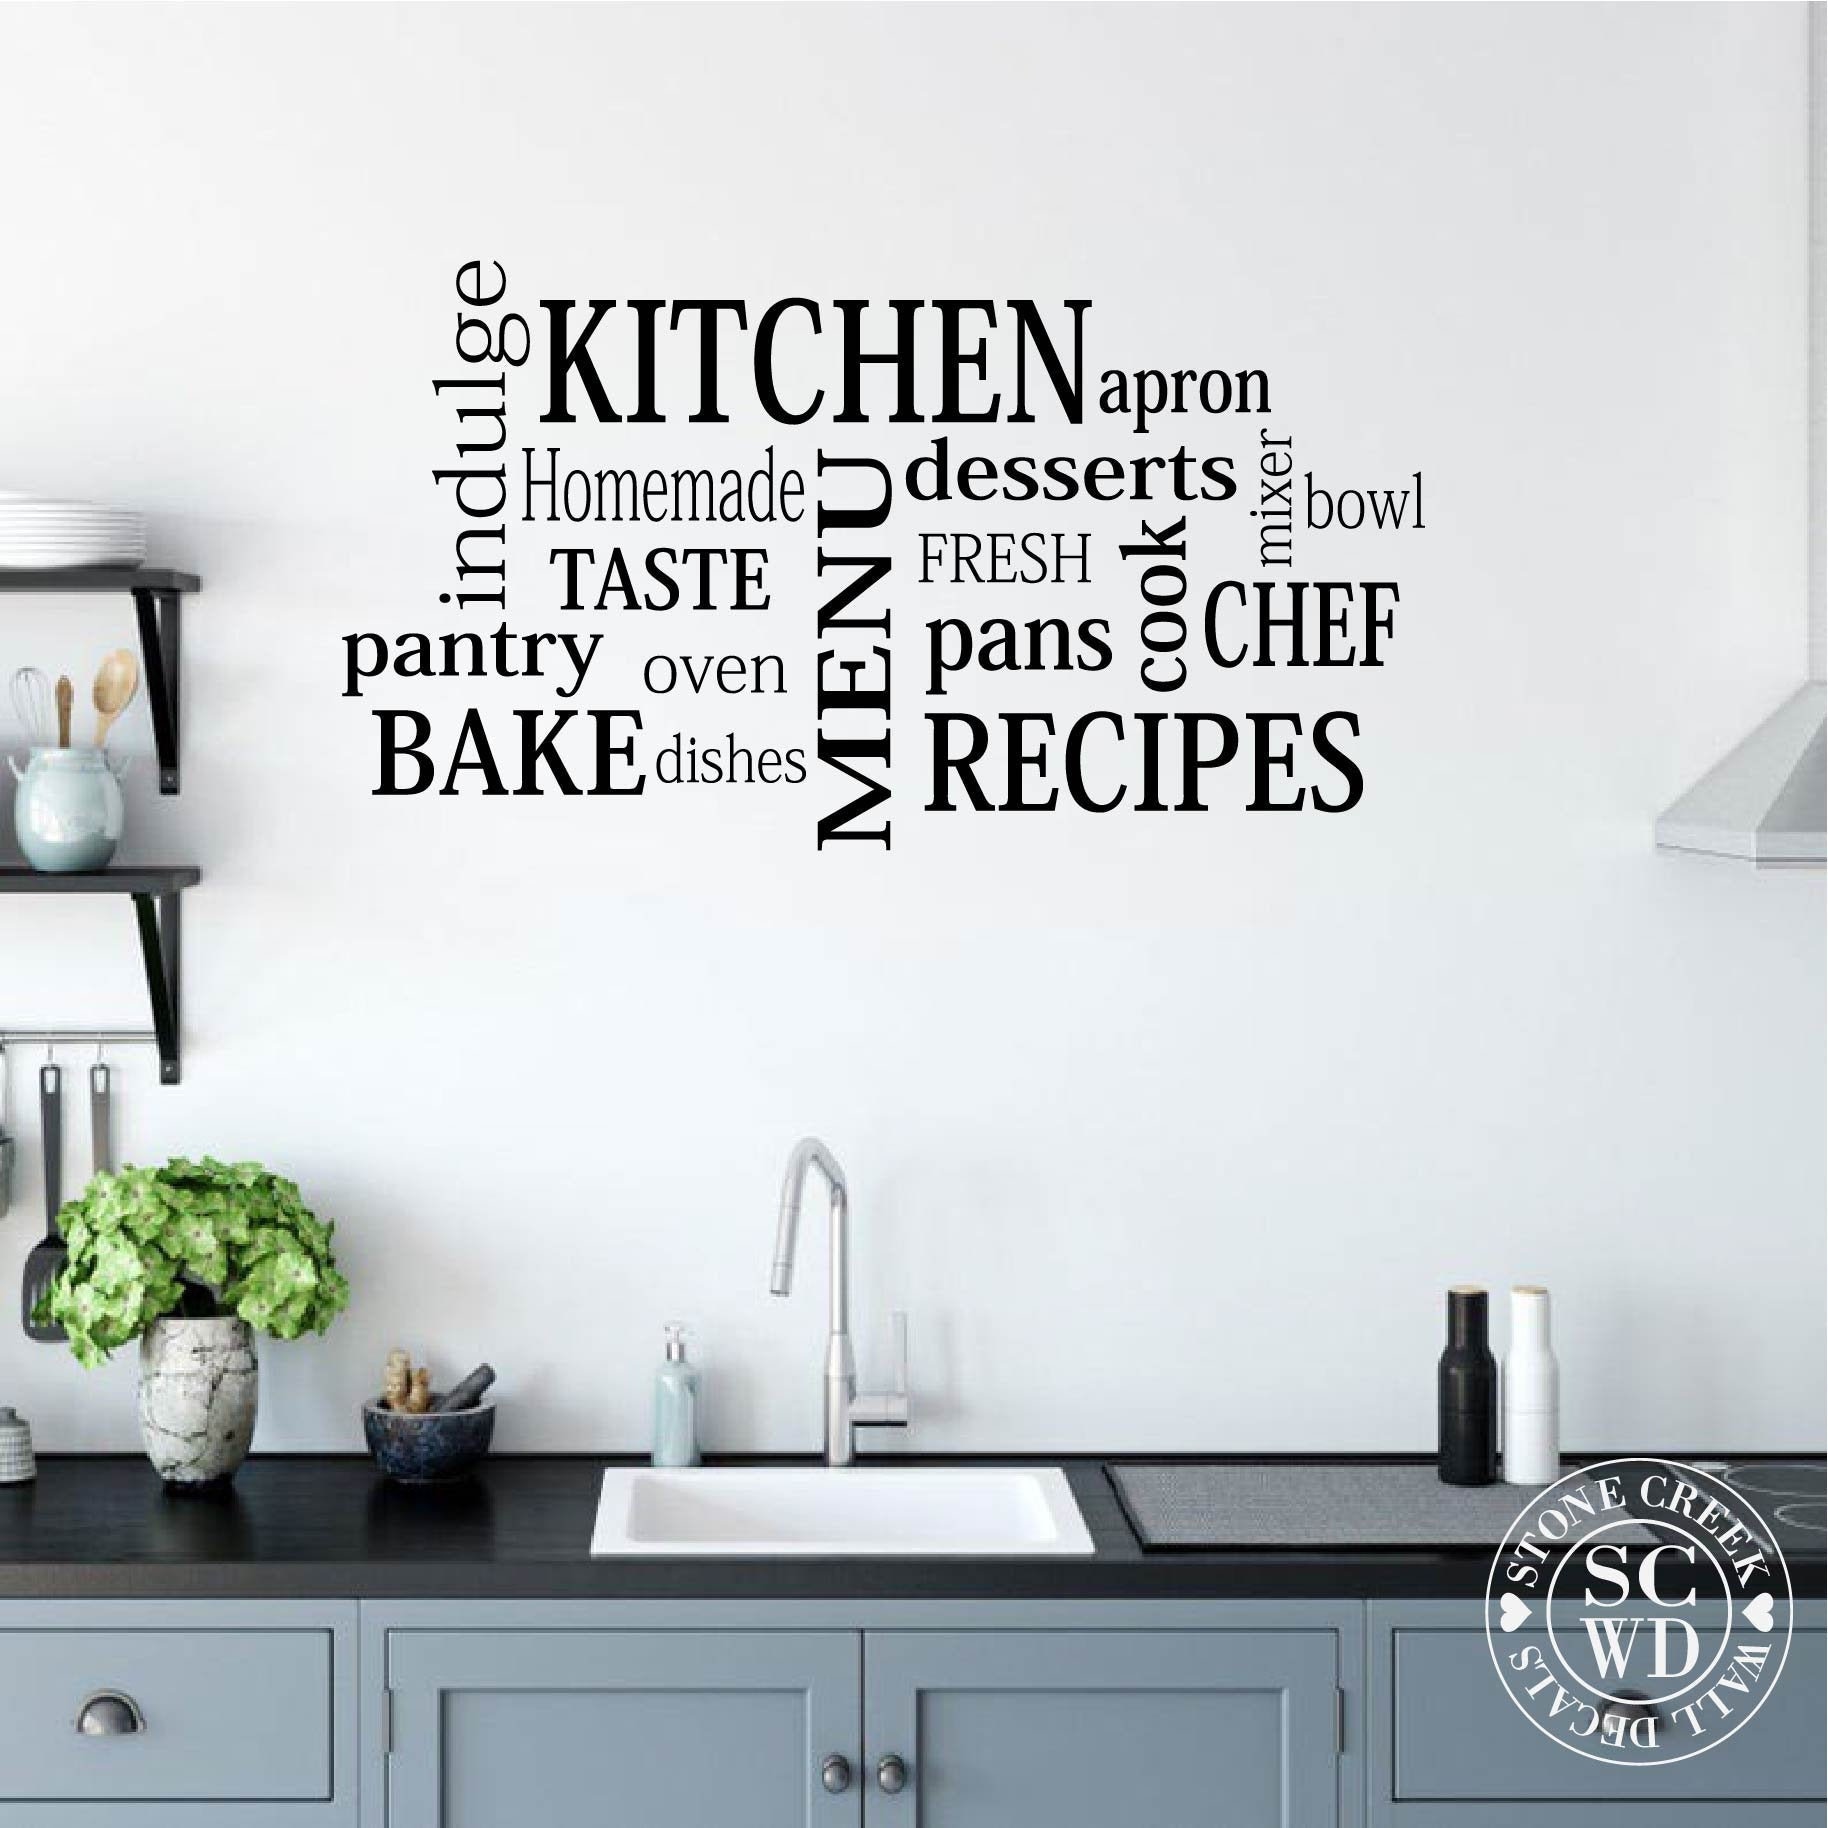 Farming Rules Subway Vinyl Letters Wall Decals Sticker Quotes 23x15-inch Black 